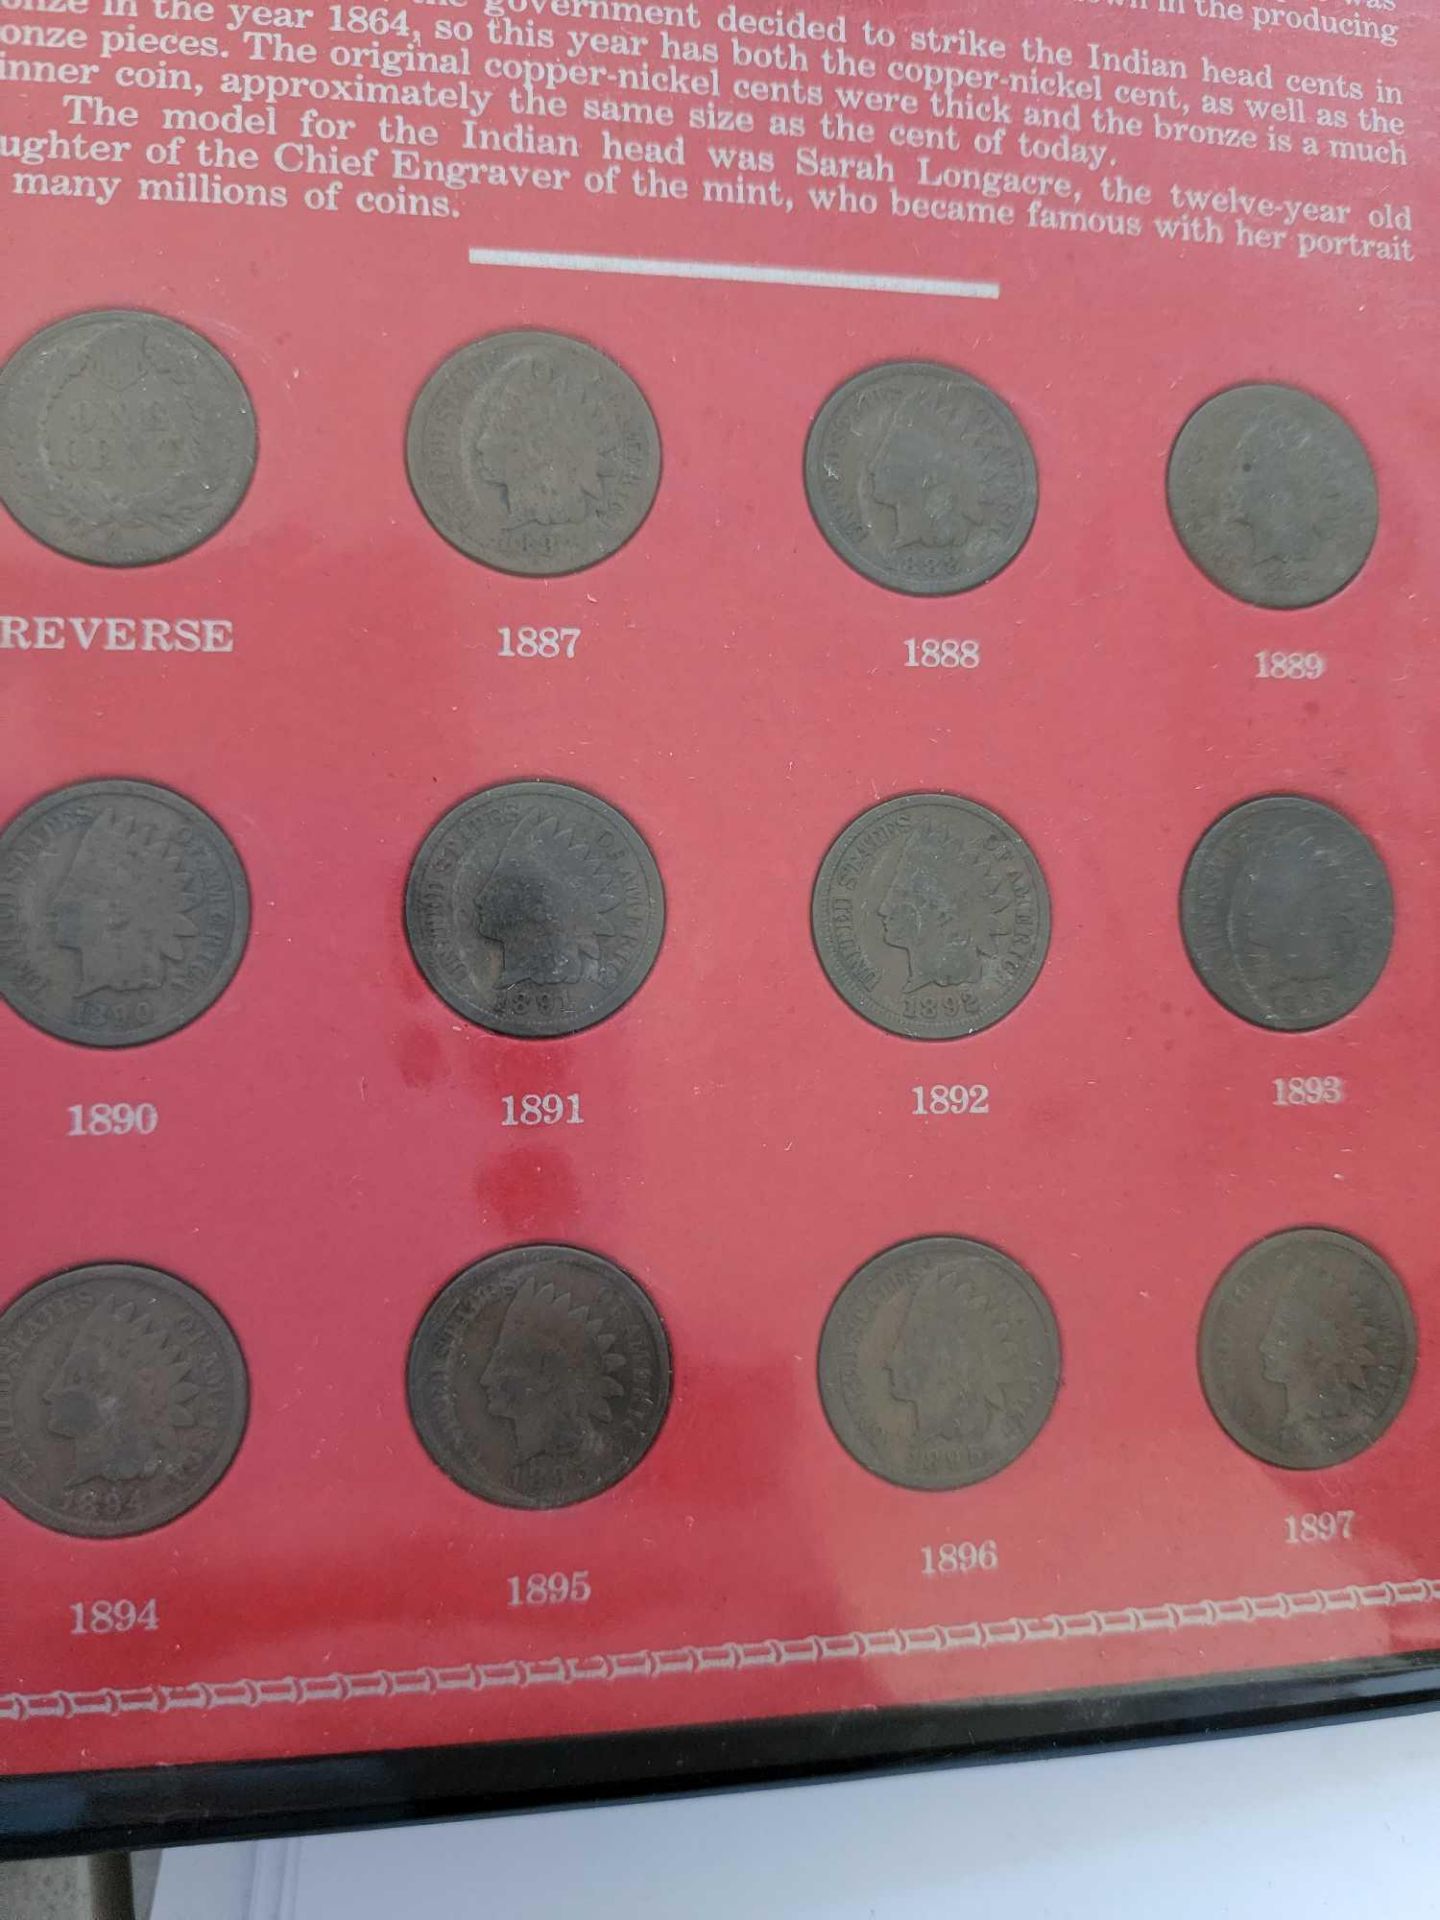 Indian head cents collectable book - Image 4 of 5